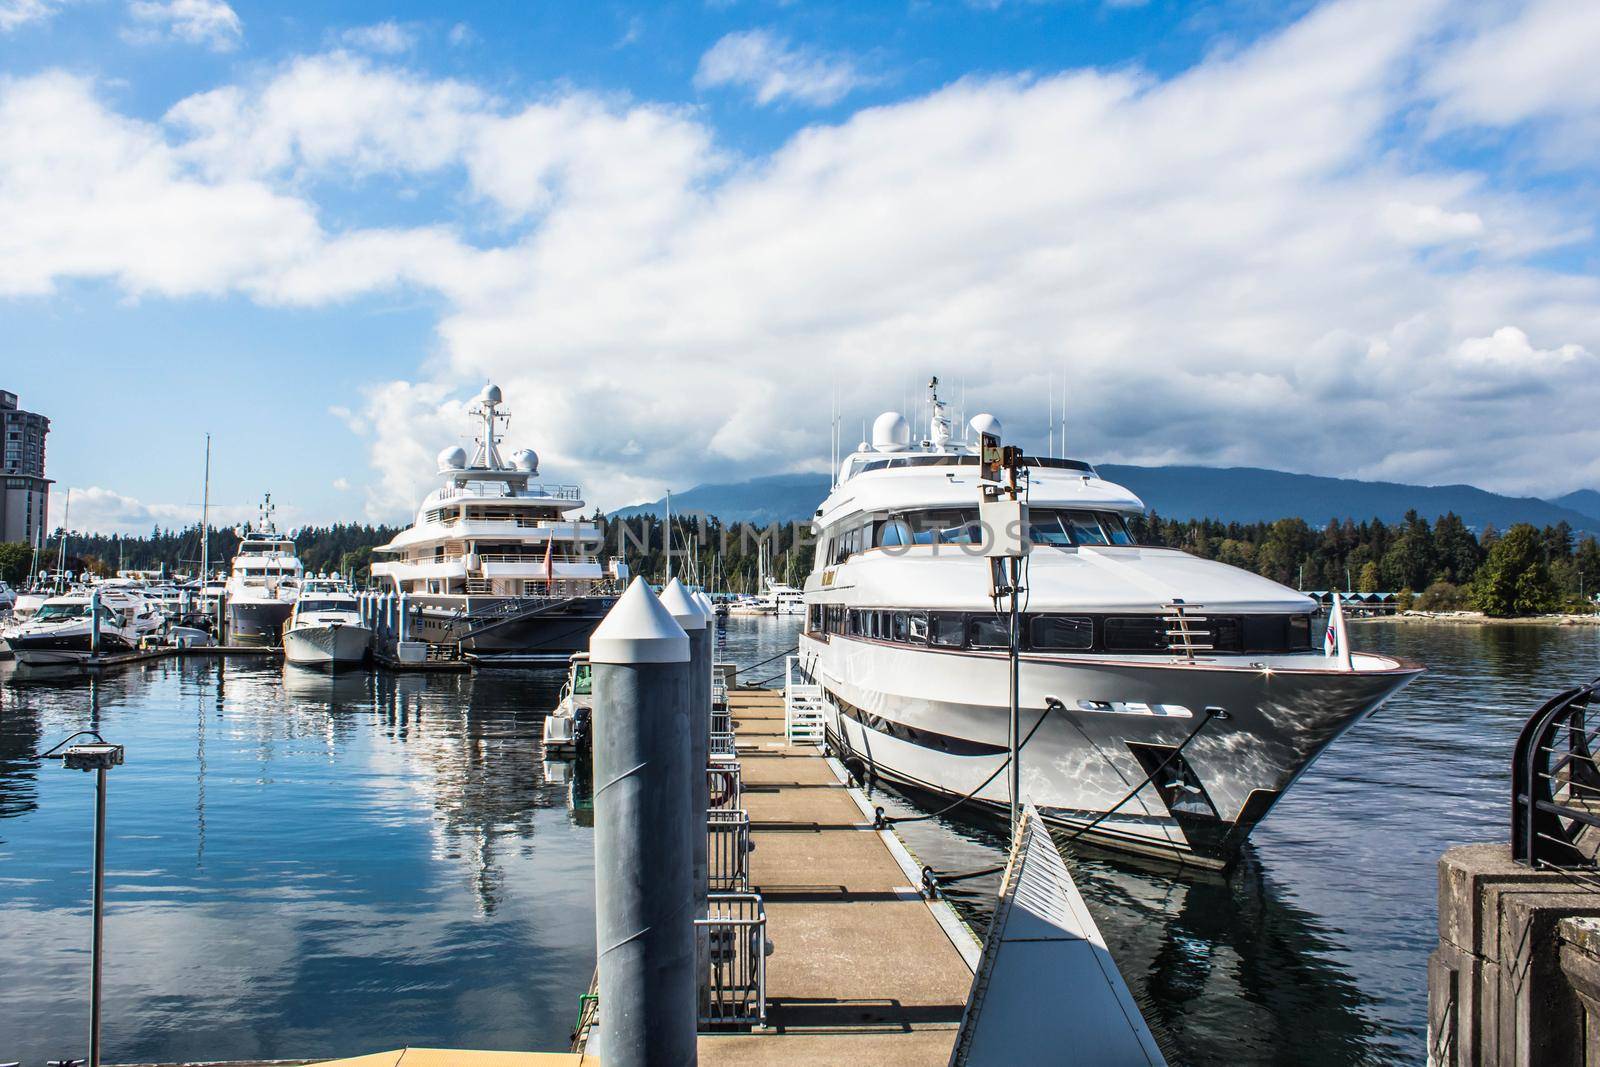 Many variety of yachts moored in a marina near Stanley park in Vancouver BC., Canada. by JuliaDorian